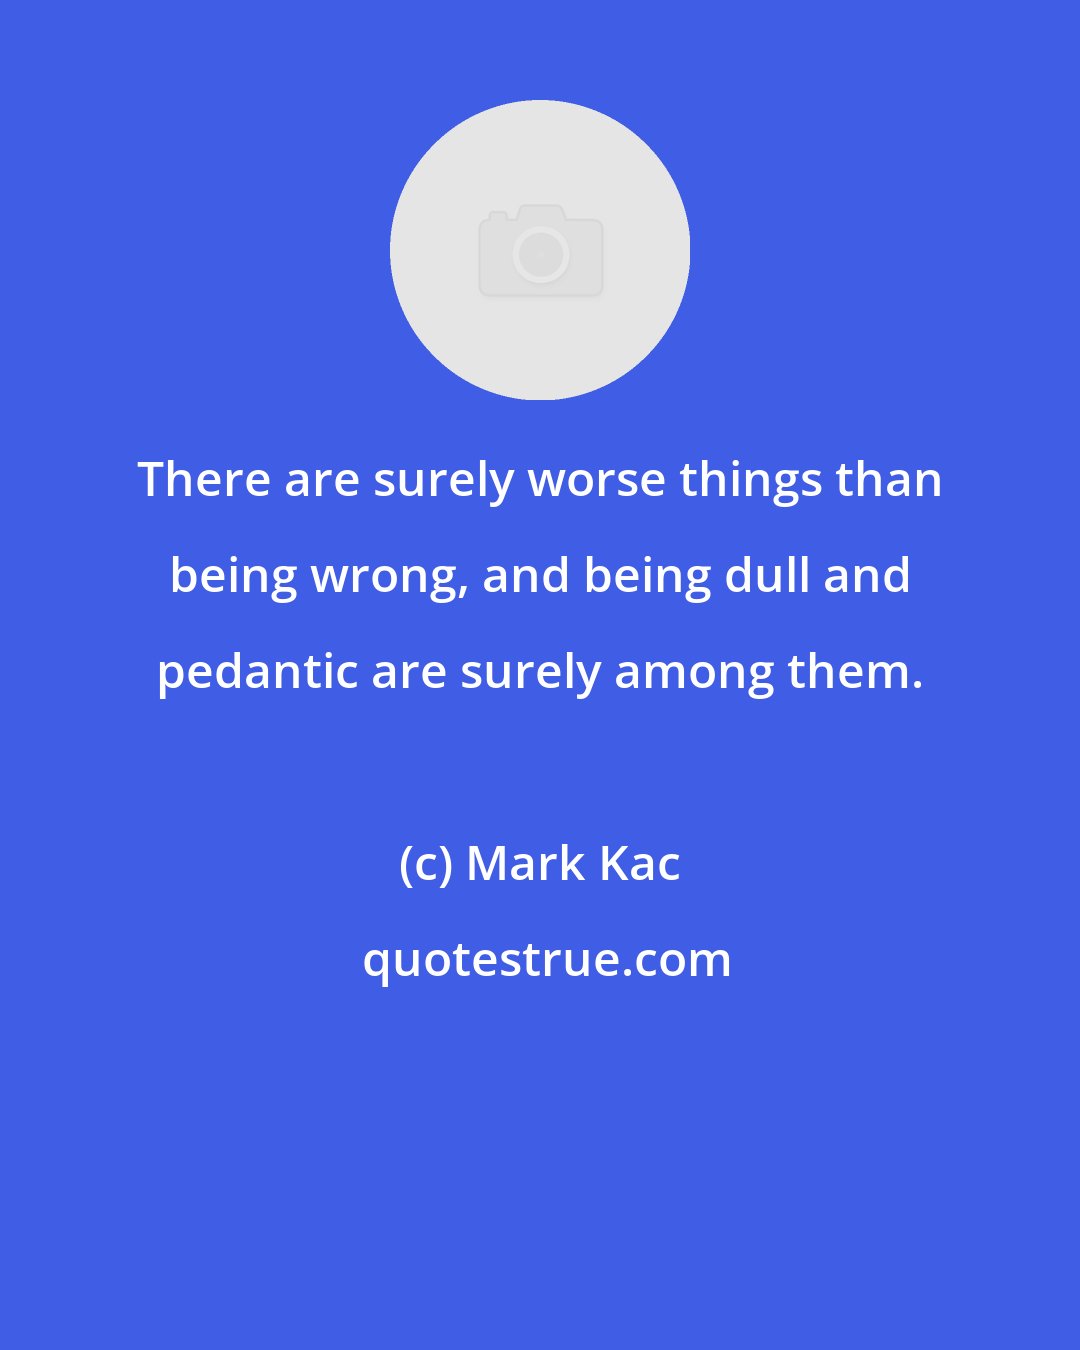 Mark Kac: There are surely worse things than being wrong, and being dull and pedantic are surely among them.